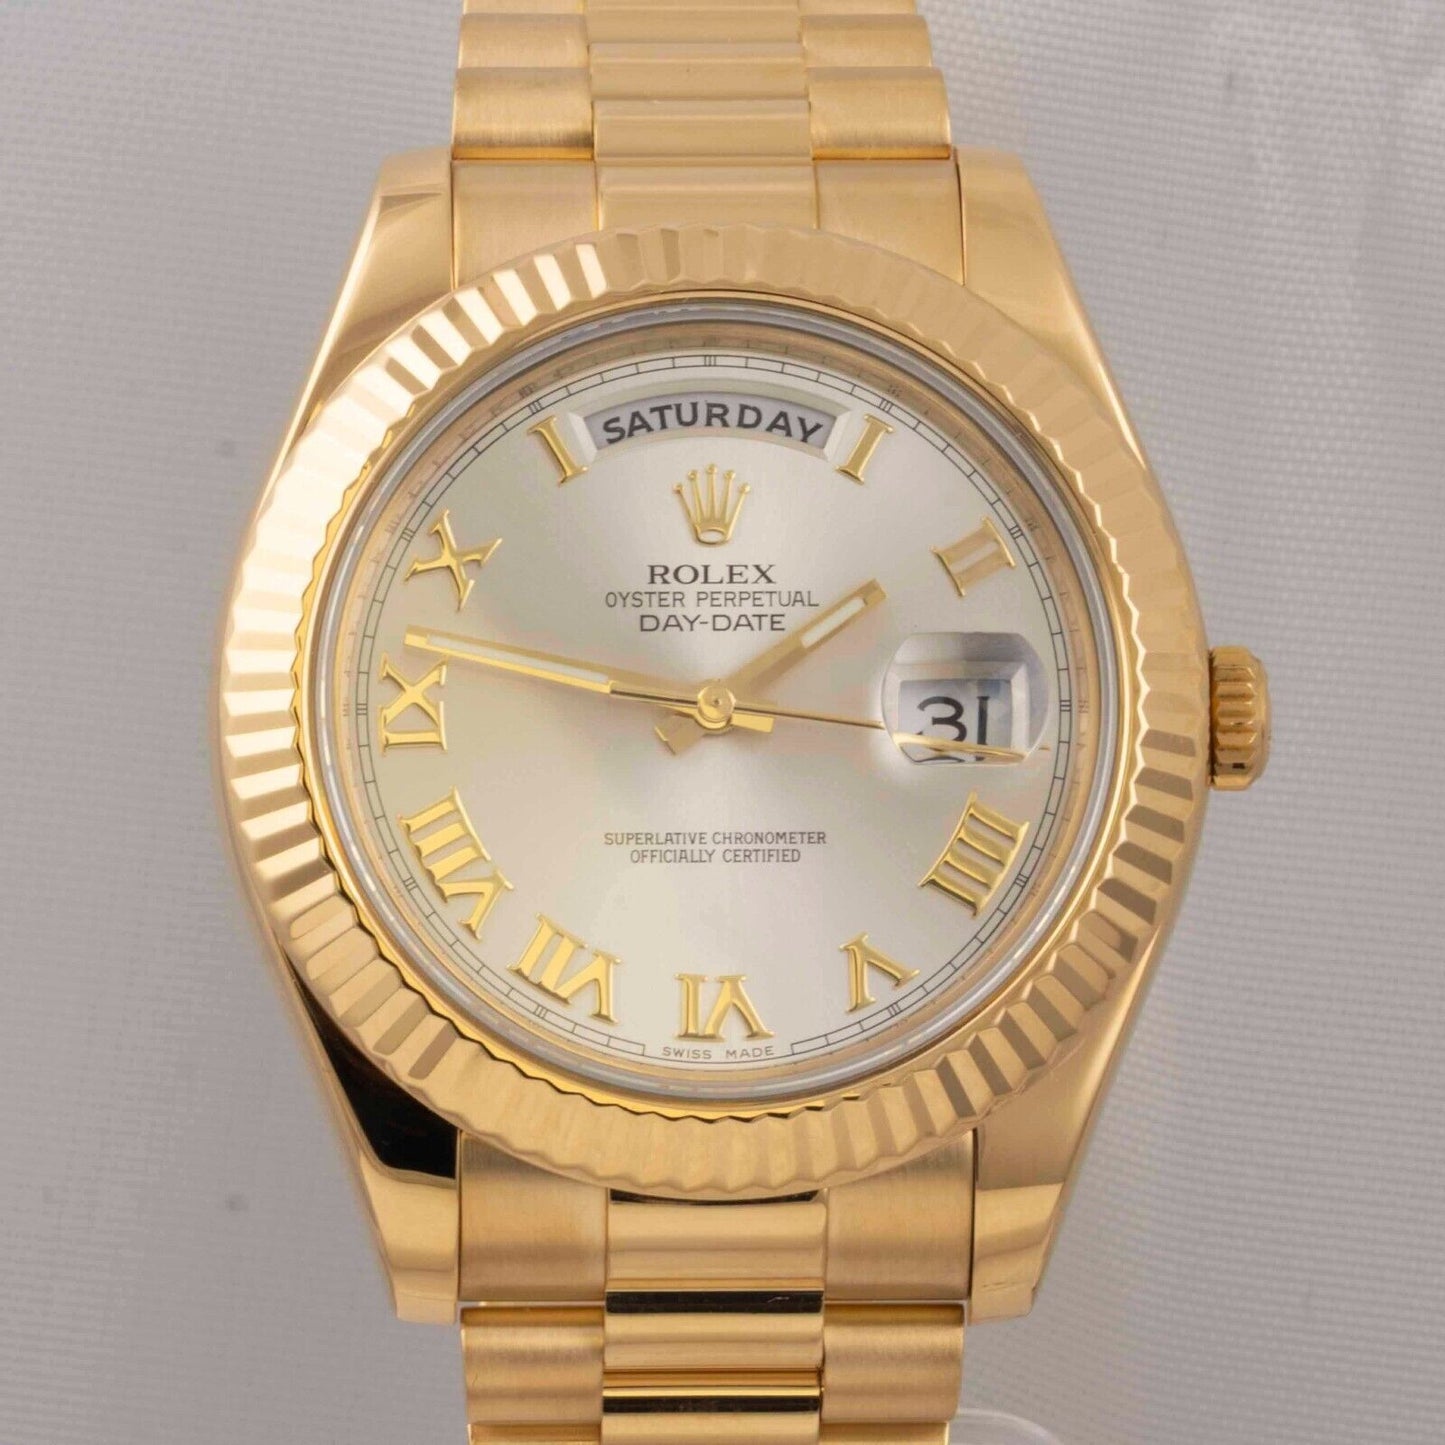 2017 Rolex Day-Date II 18k Yellow Gold Silver Dial 41mm Watch 218238 BOX PAPERS